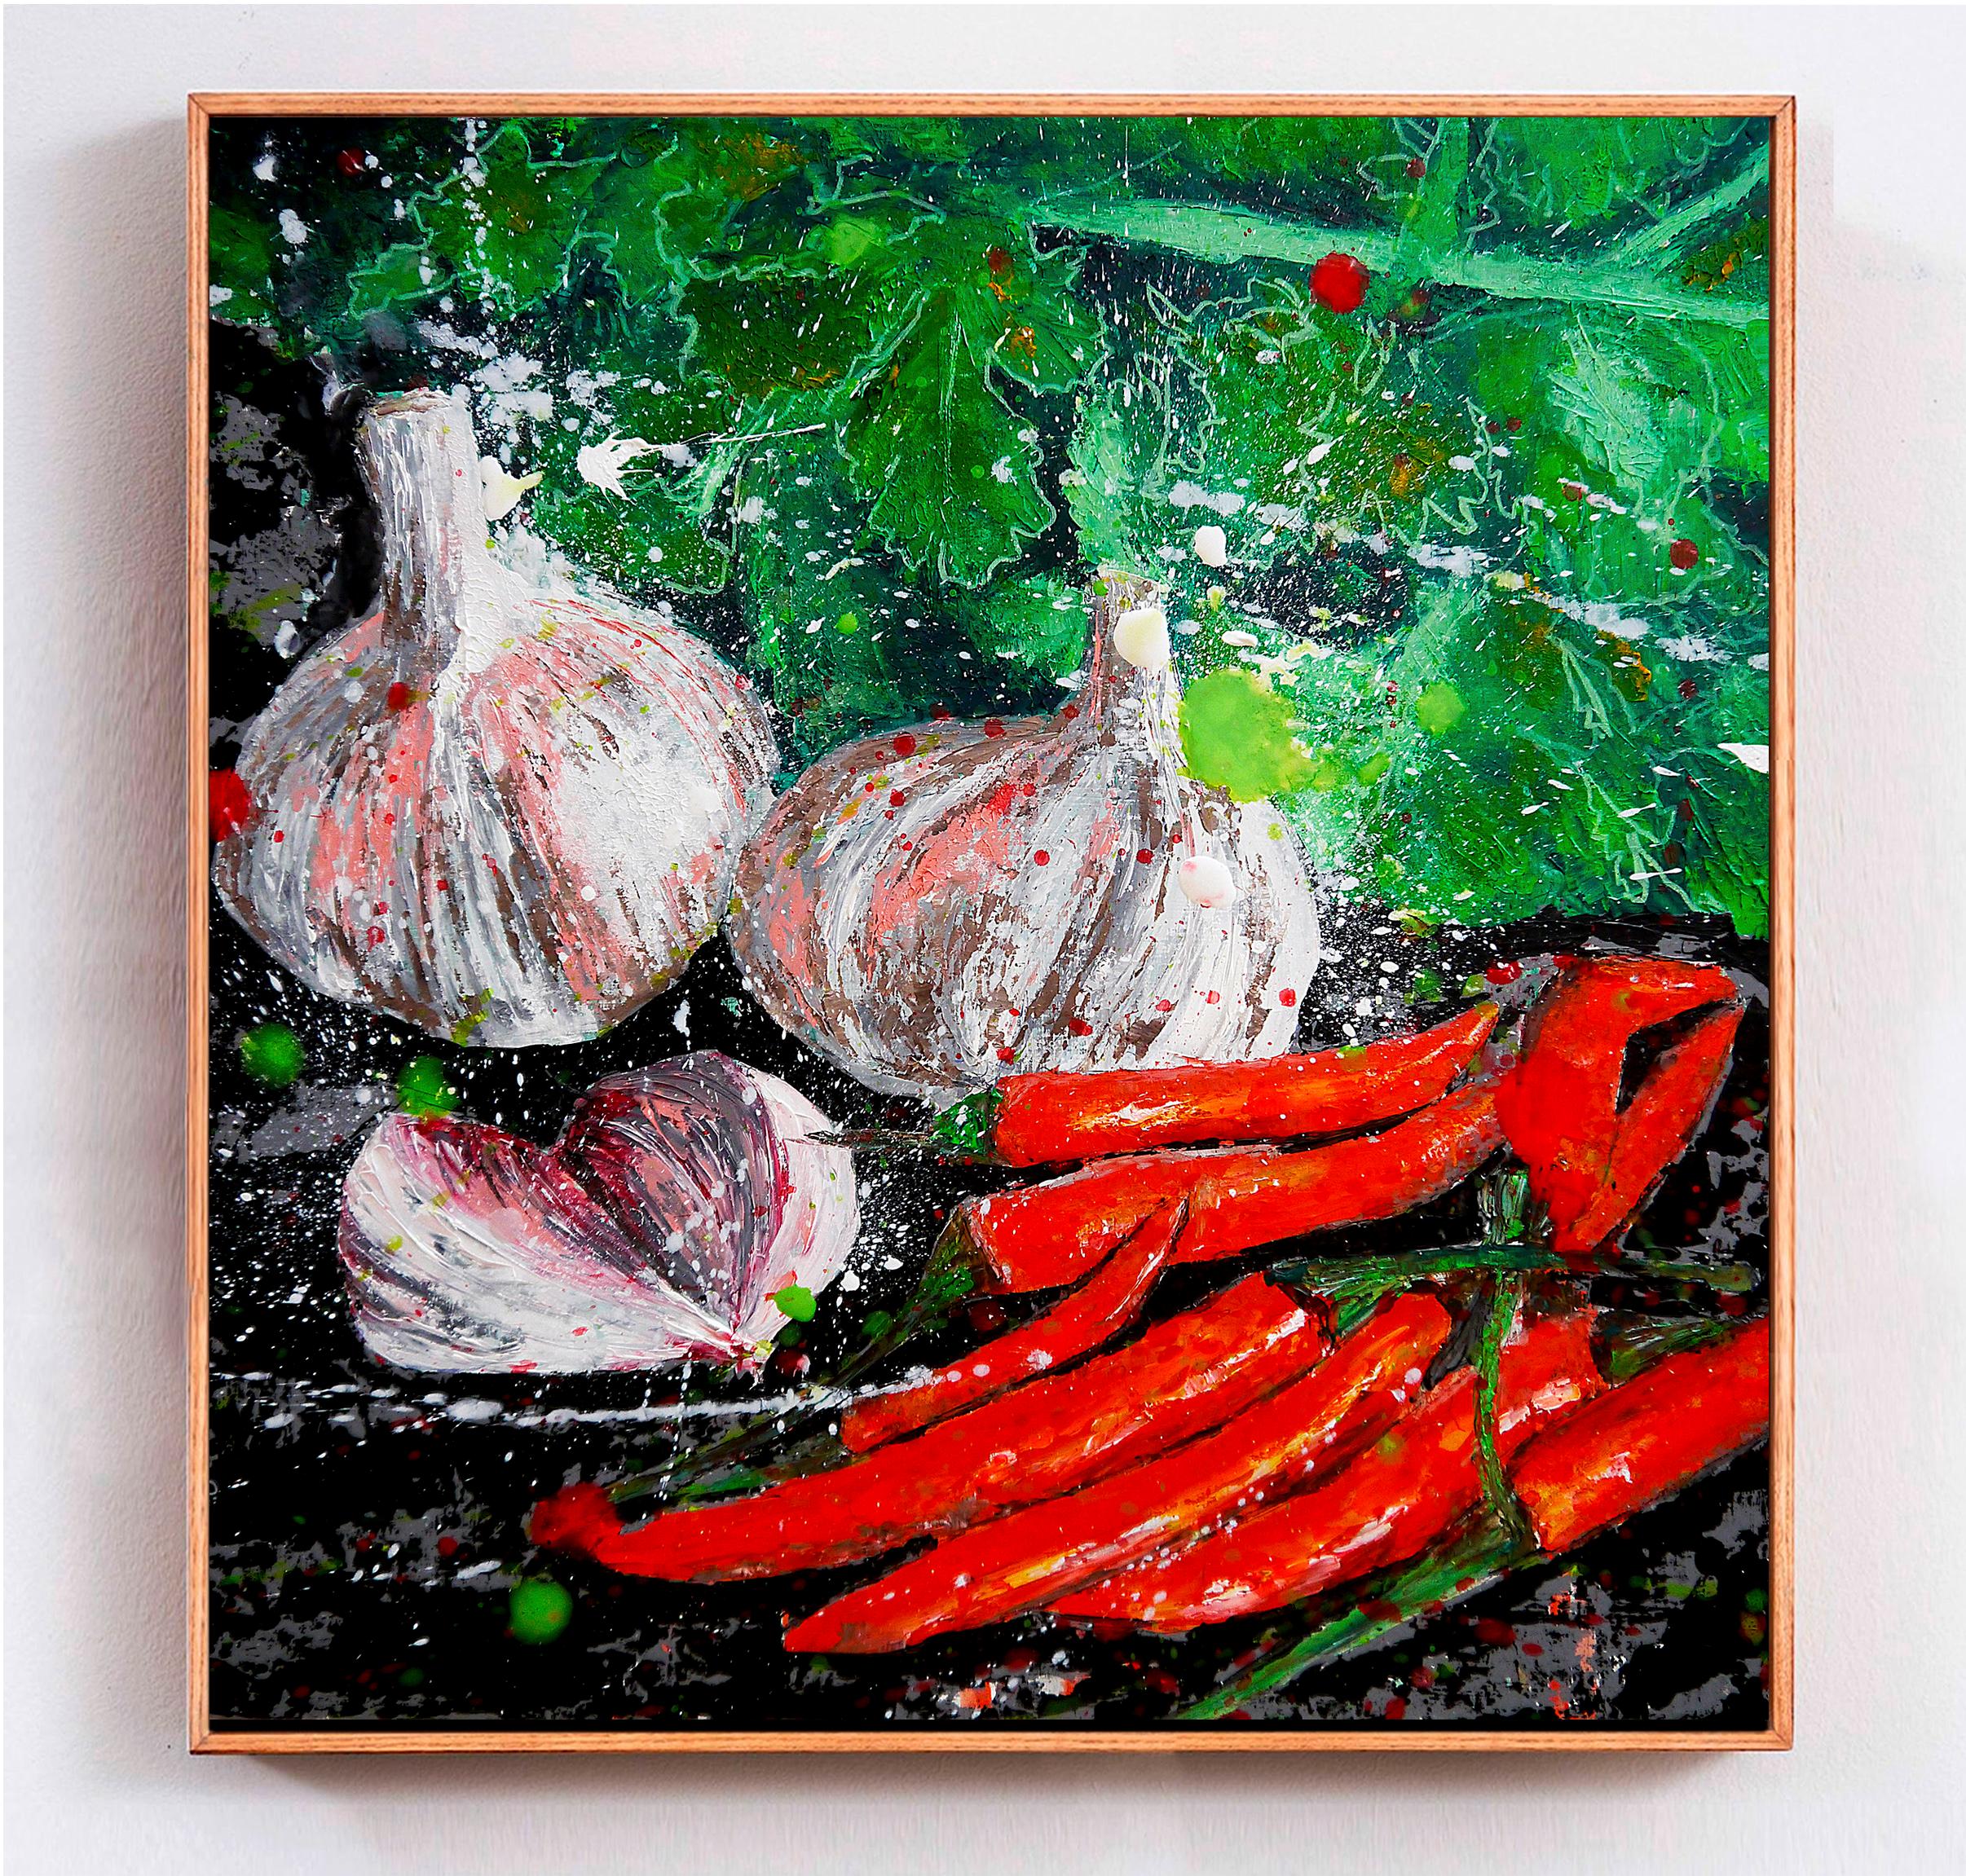 French School  Garlic&Chili pepper Starwars Impressionist FAST DELIVERY - Painting by Bazevian DelaCapuciniere